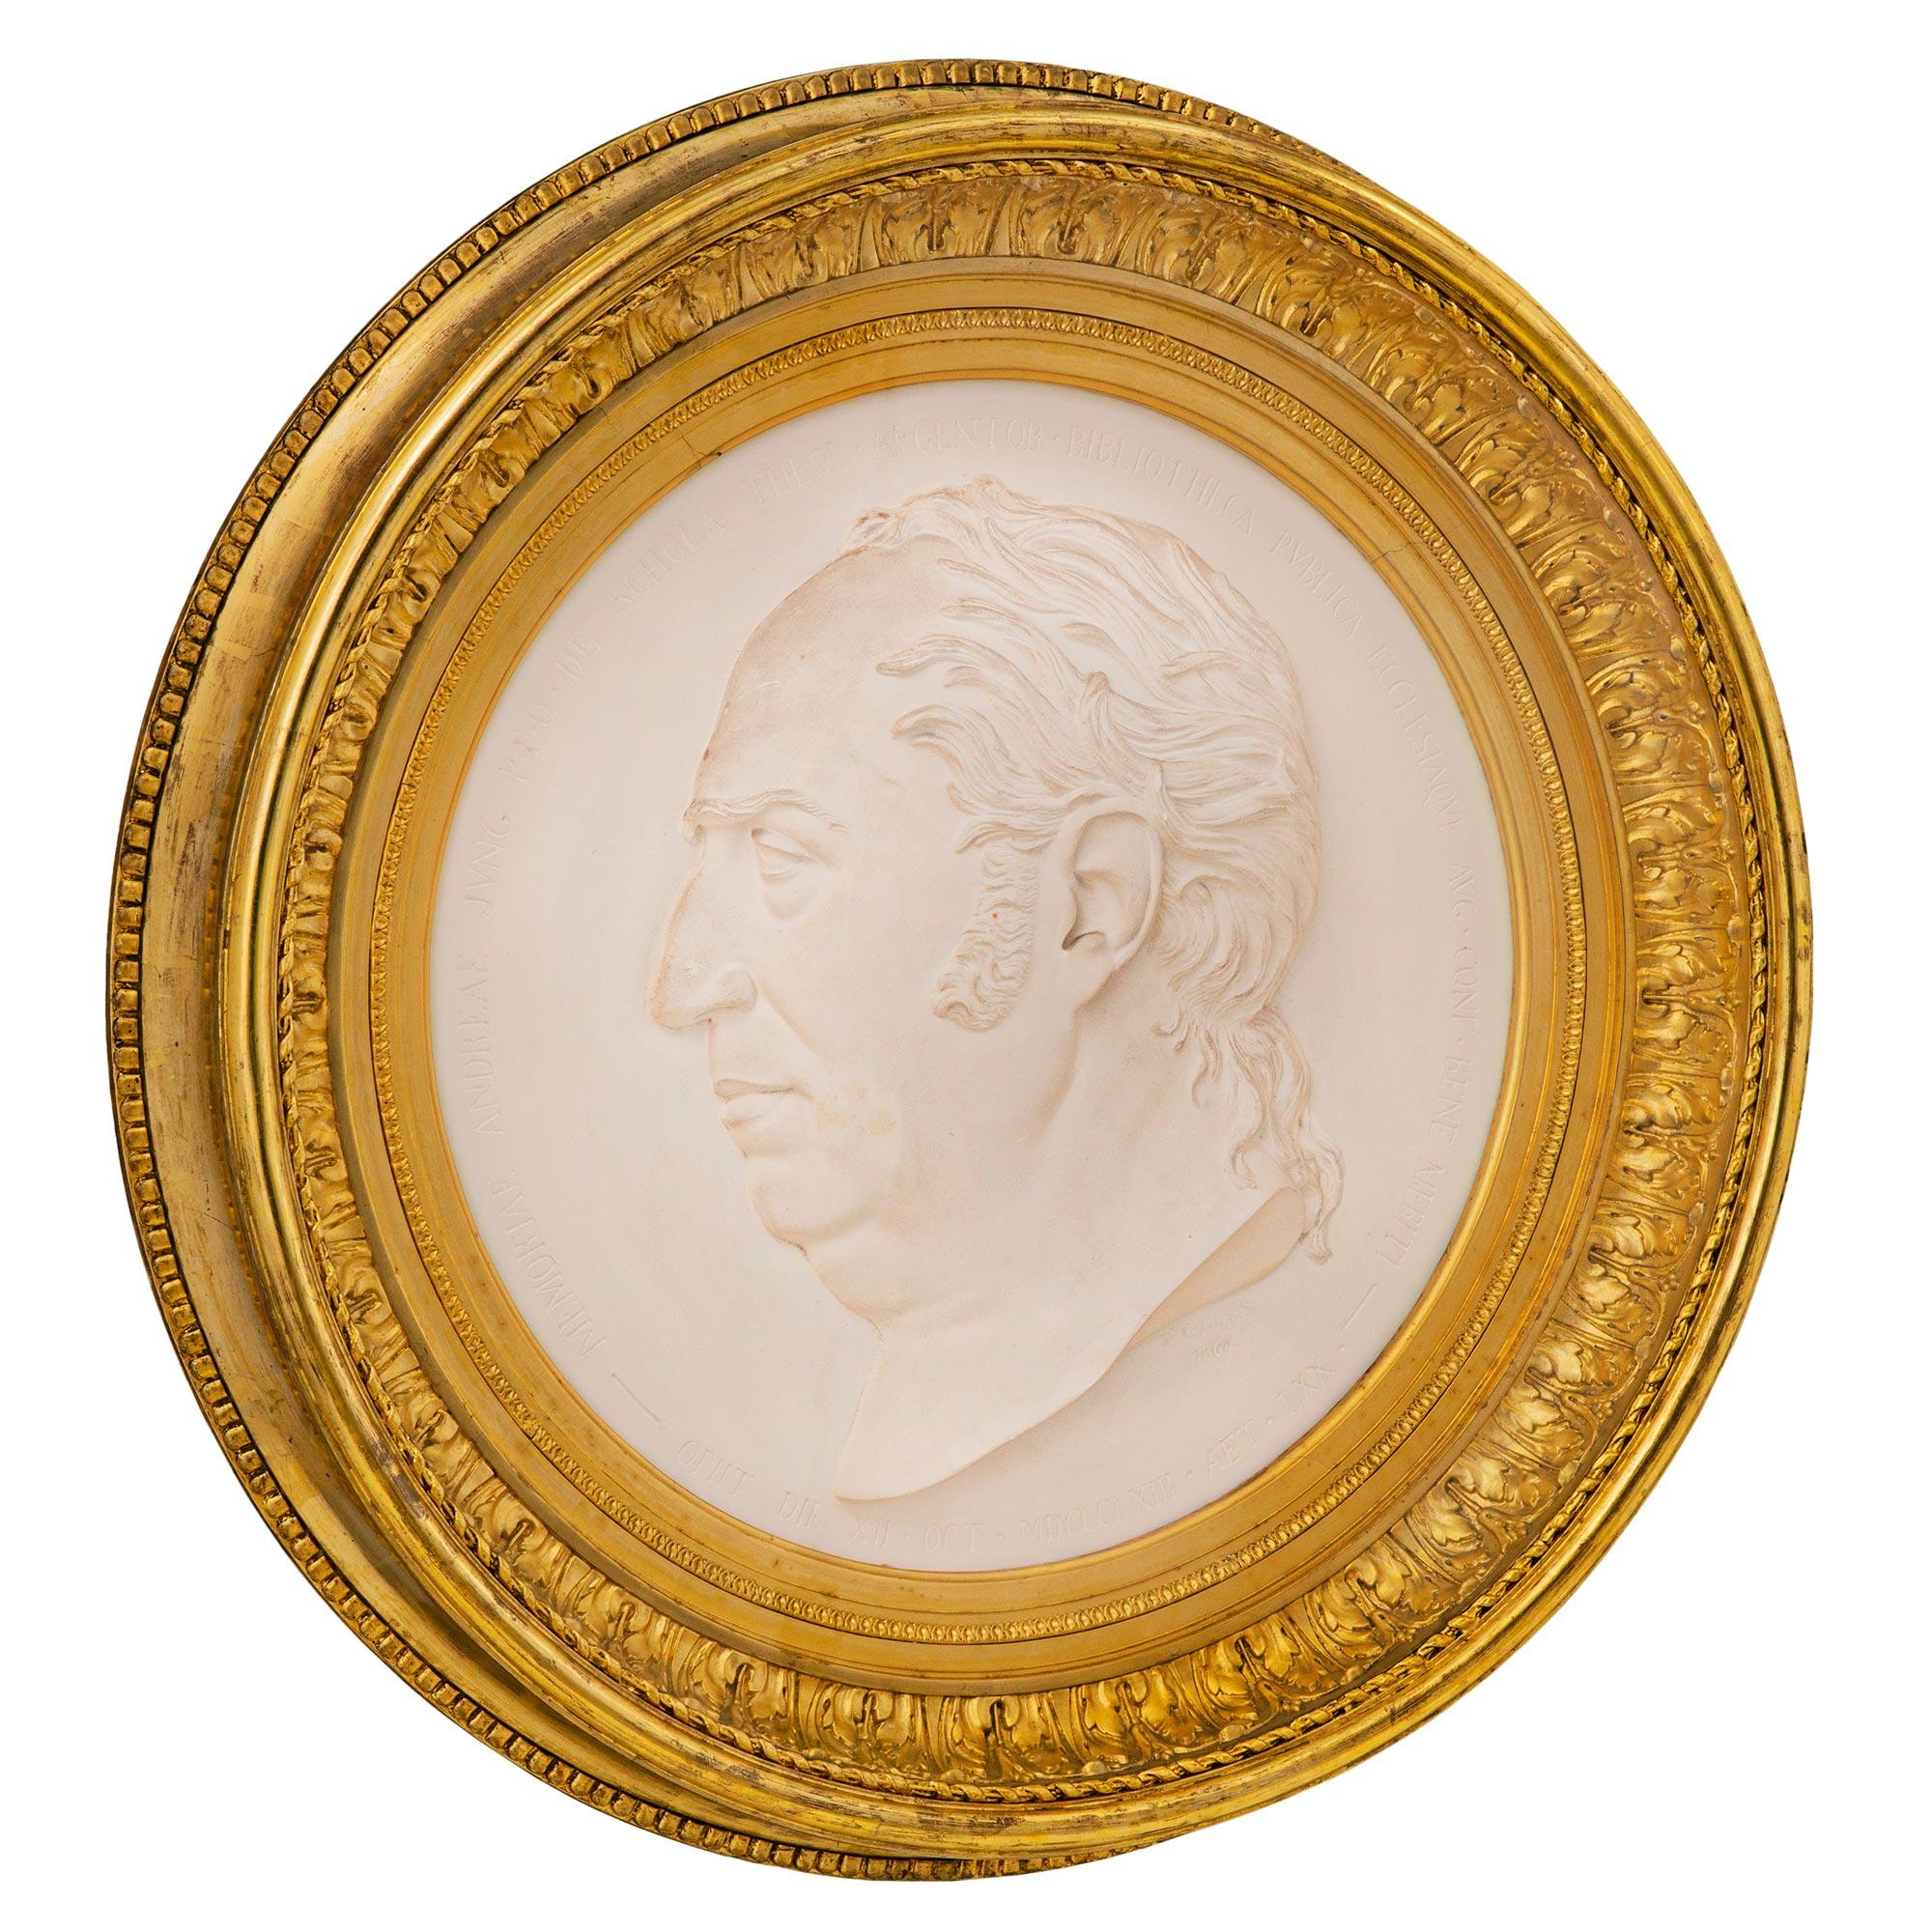 A most impressive and extremely well executed Italian 19th century Louis XVI st. giltwood and plaster wall plaque, signed P. GRASS 1864. The exceptionally carved wall decor is centered by a handsome and finely detailed man with the